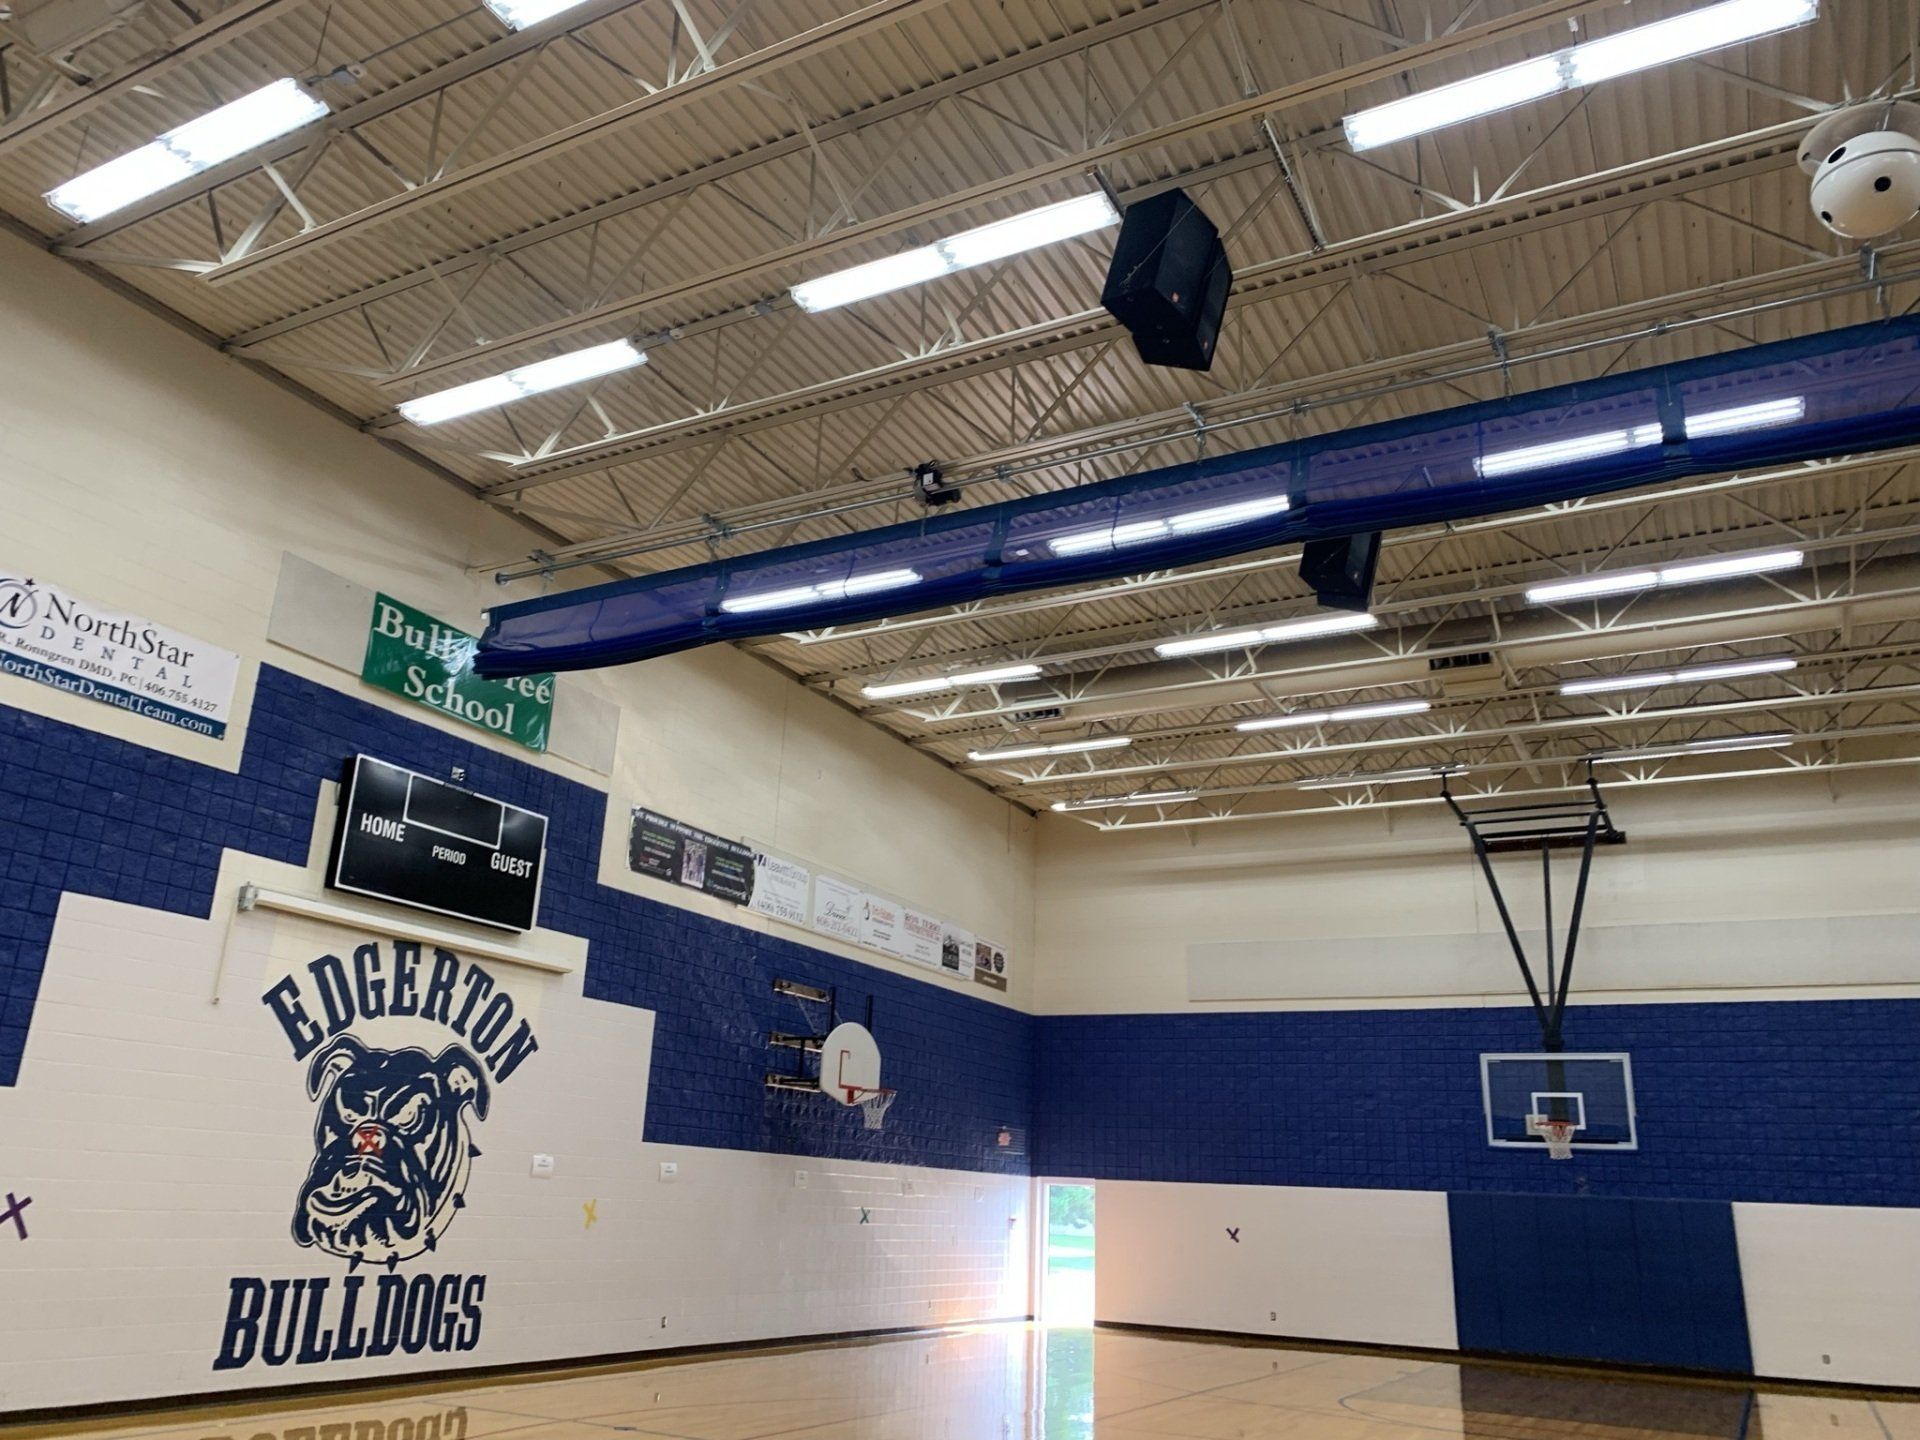 A gym with a basketball hoop and a sign that says ' edgarton bulldogs ' on it.